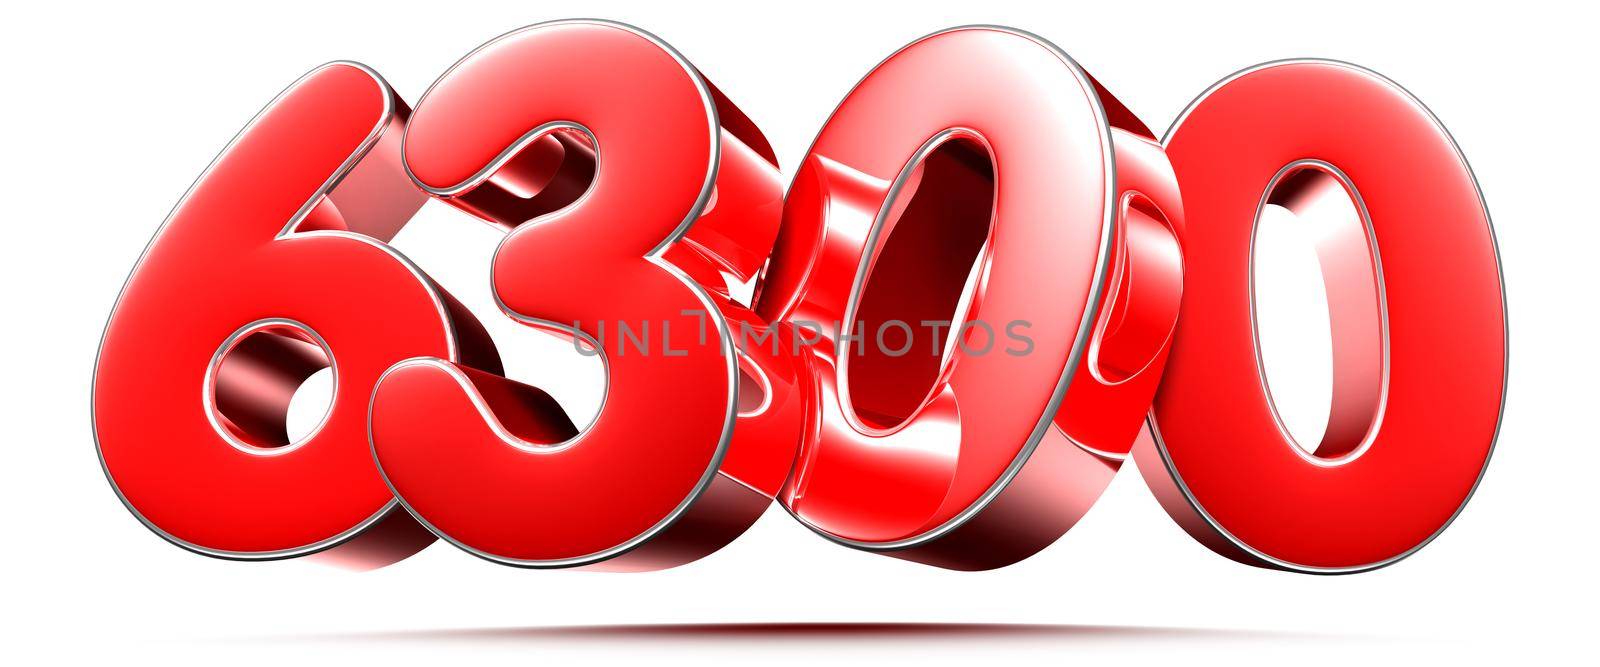 Rounded red numbers 6300 on white background 3D illustration with clipping path